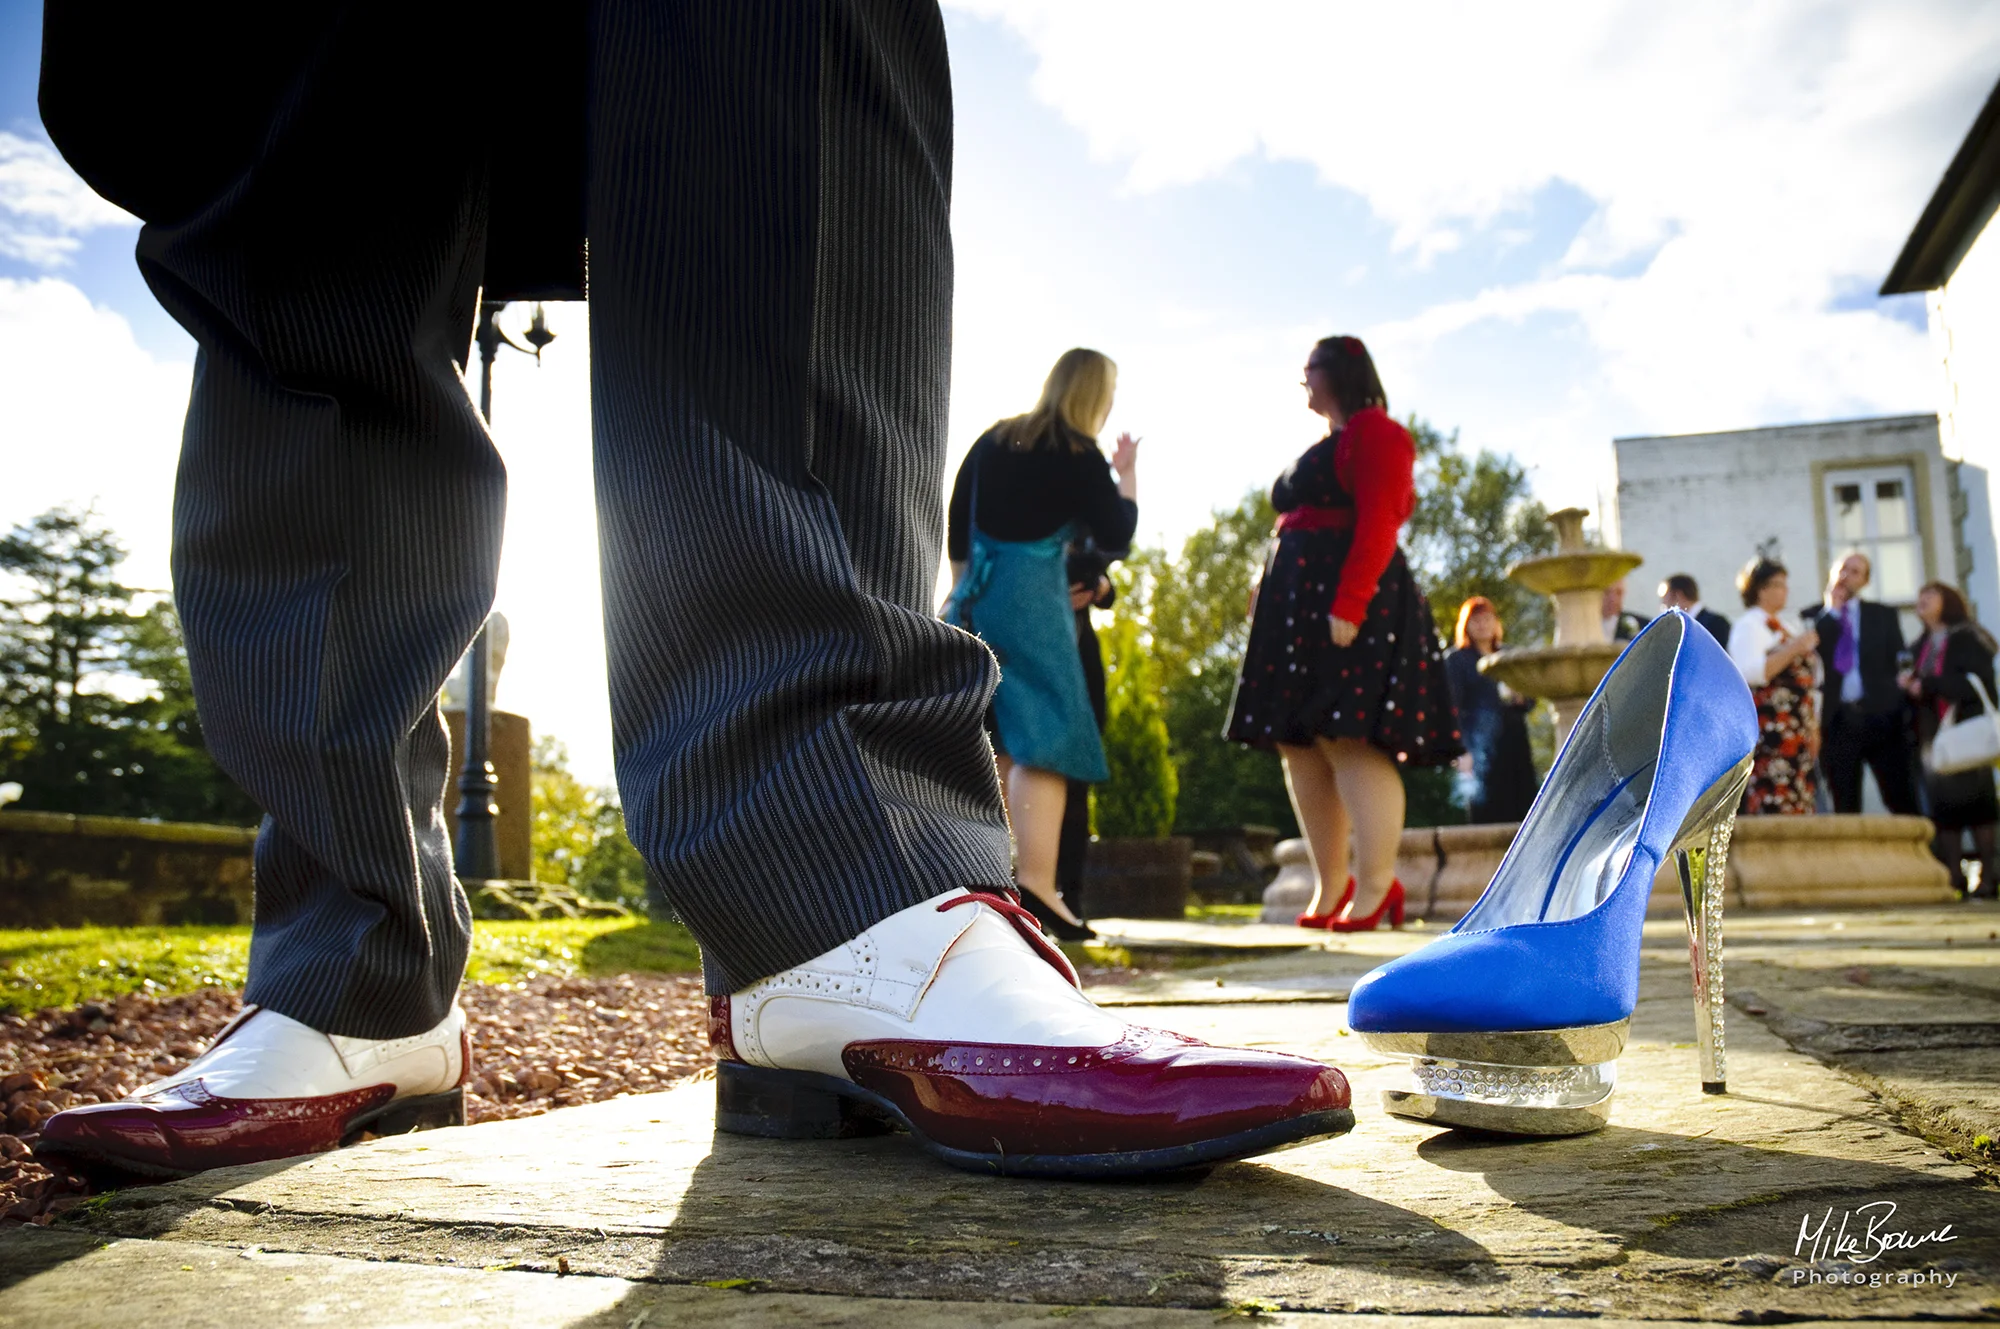 Man\'s pinstripe trouser legs with trendy white and maroon brogue shoes by a blue and chrome stiletto shoe and people milling about in the background at a reception